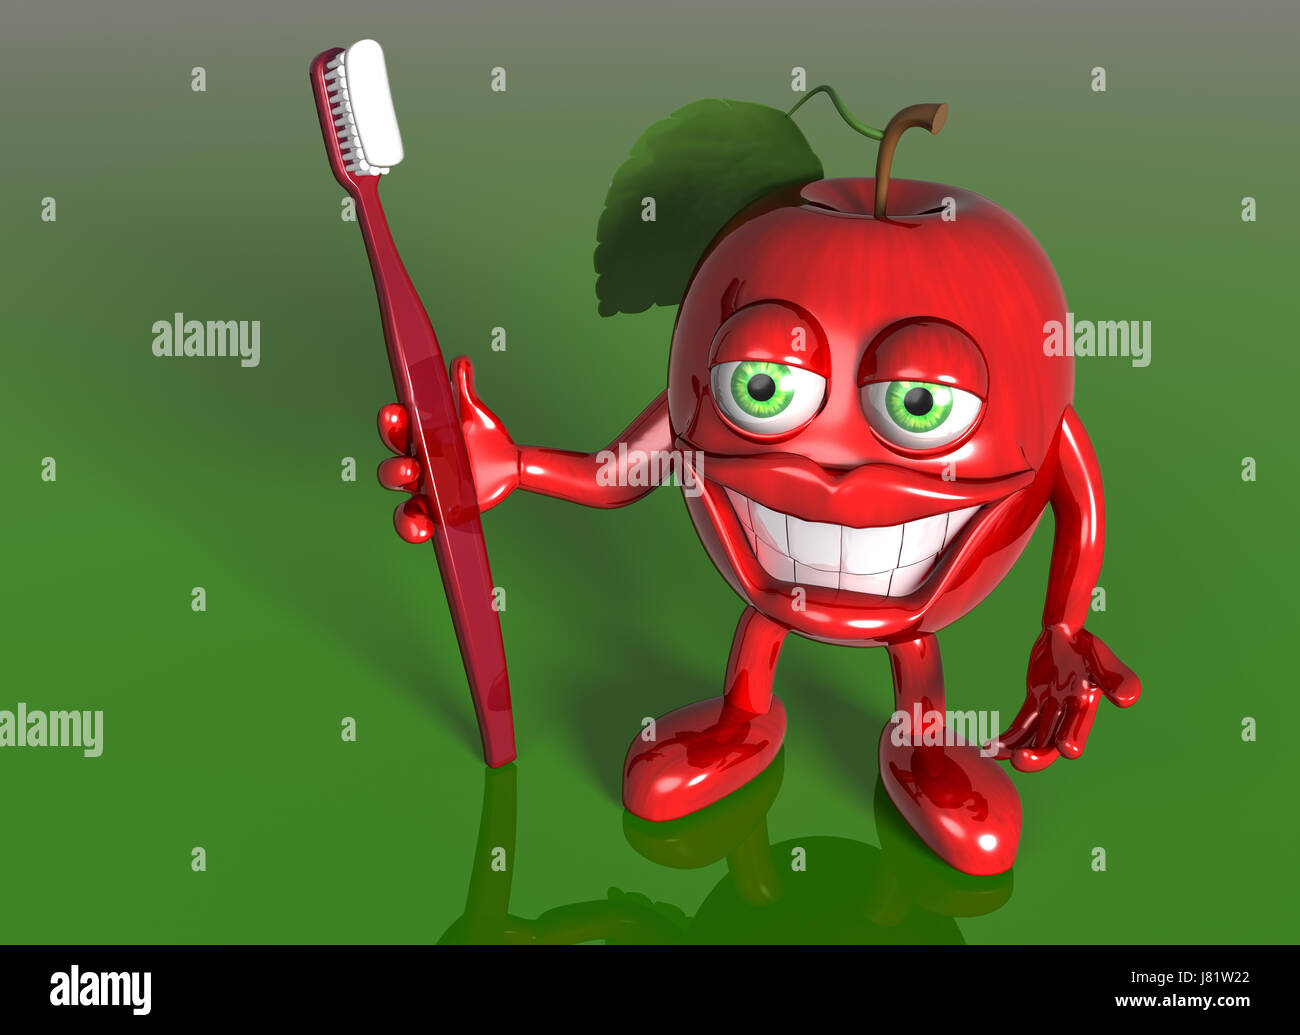 food aliment fruit bright shiny cartoon apple red fresh healthy laugh laughs Stock Photo